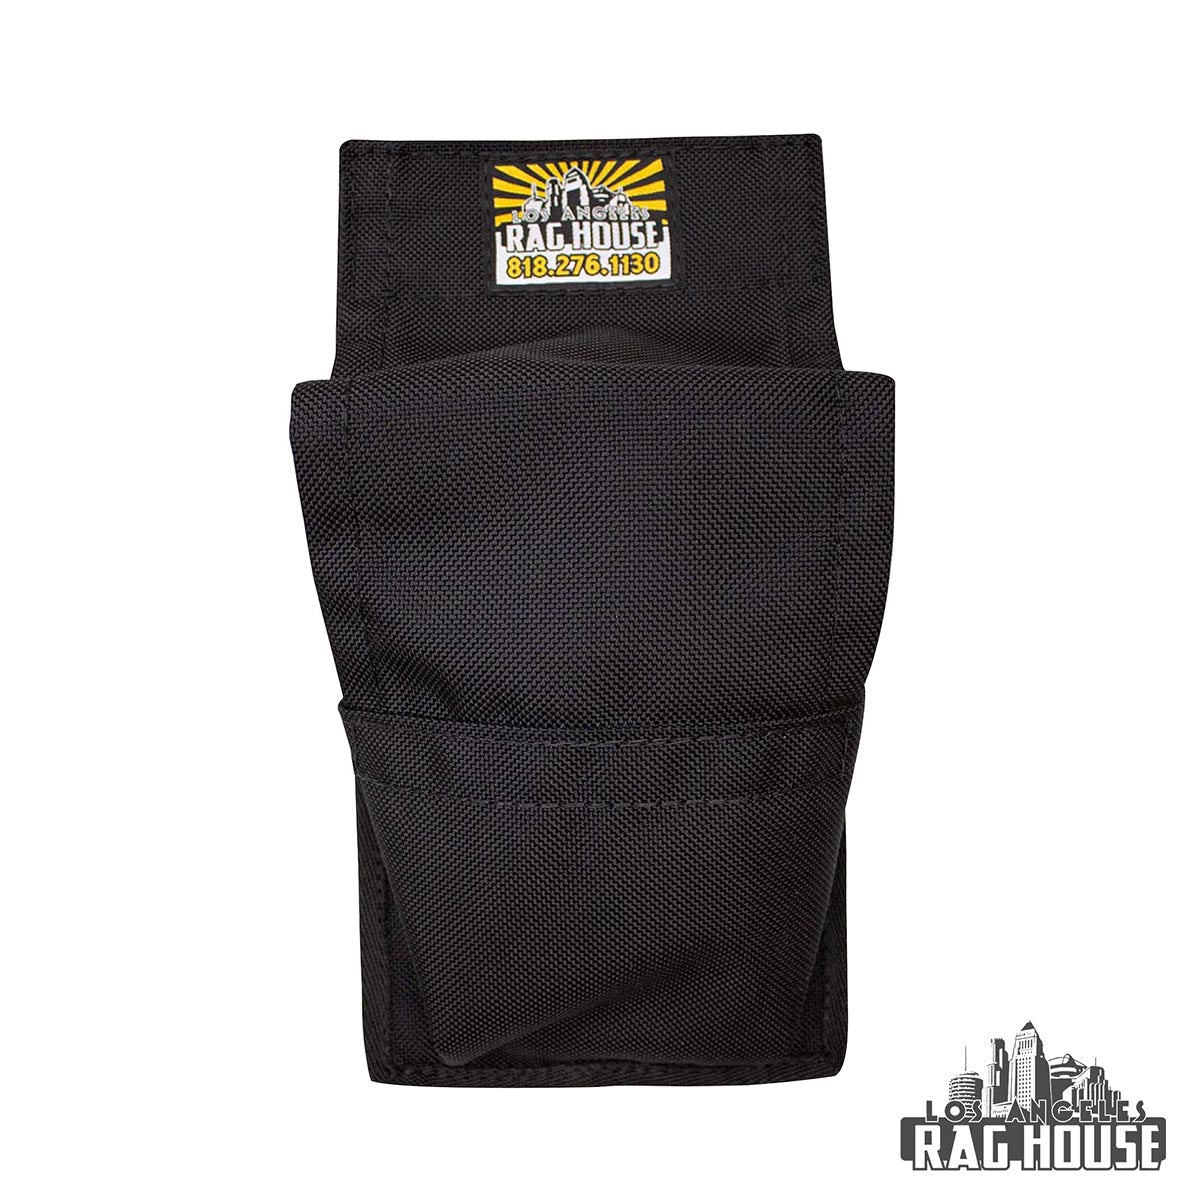 SMALL GRIP TOOL POUCH